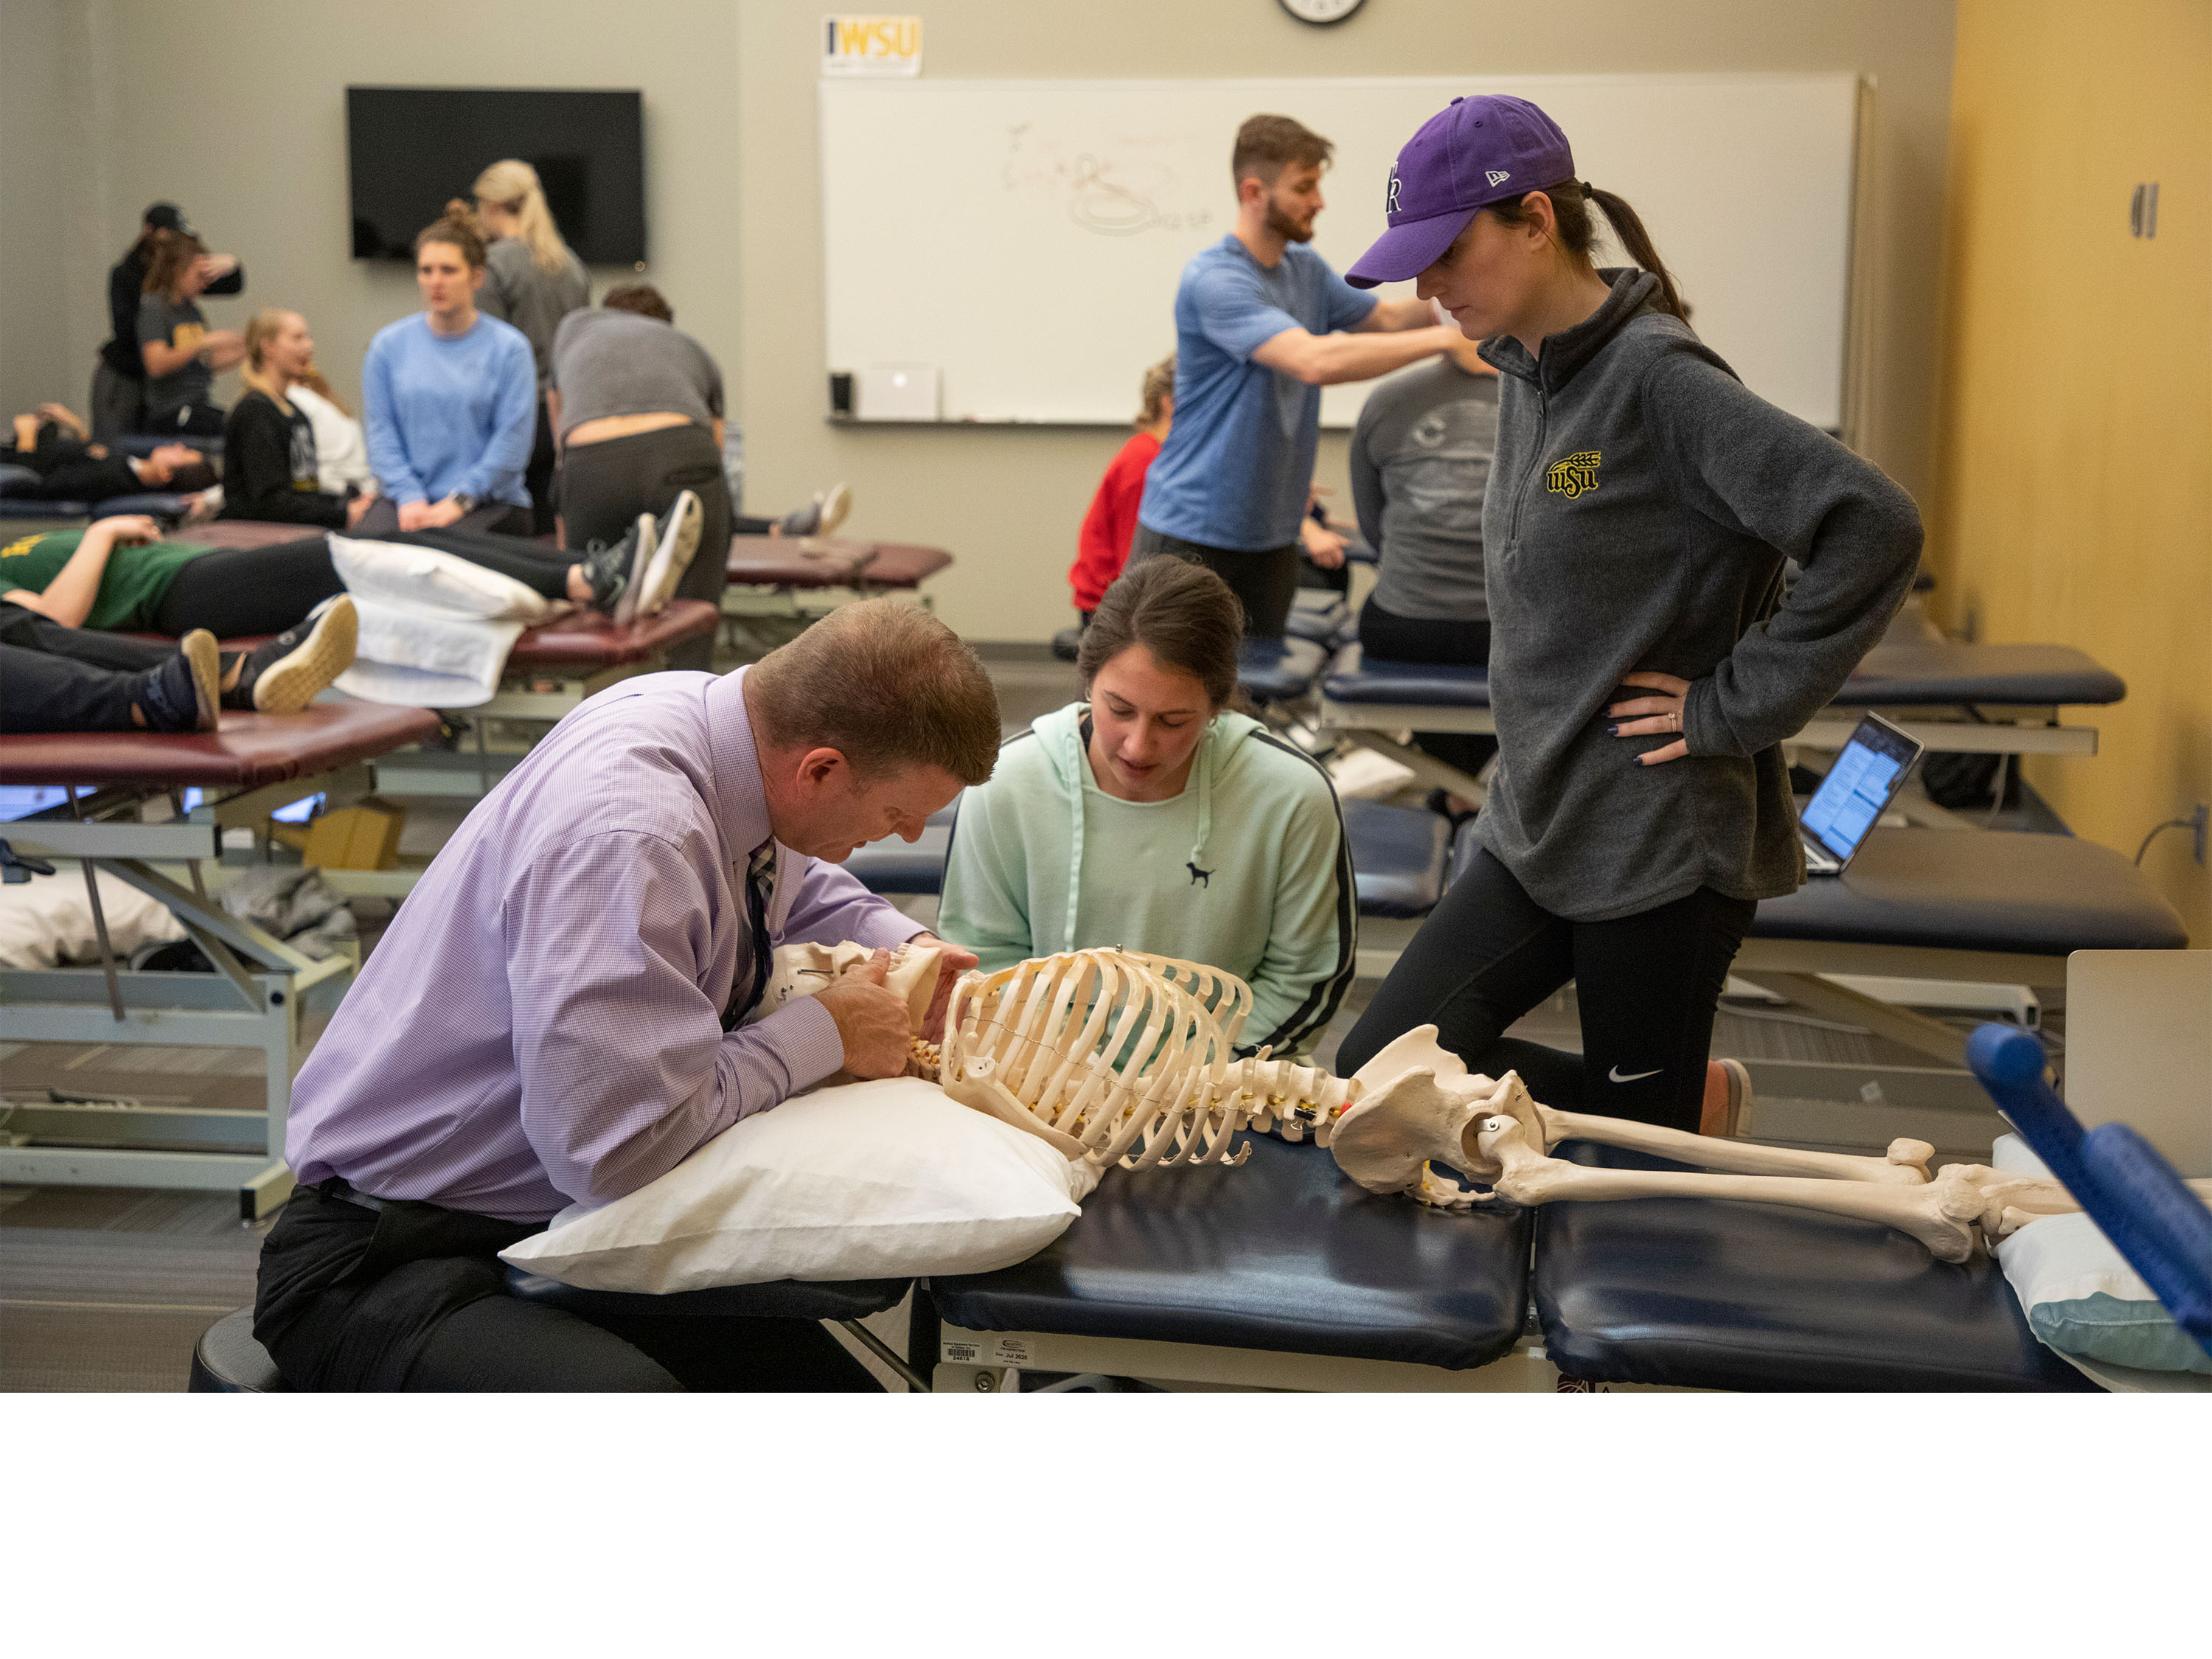 Physical therapy students and faculty